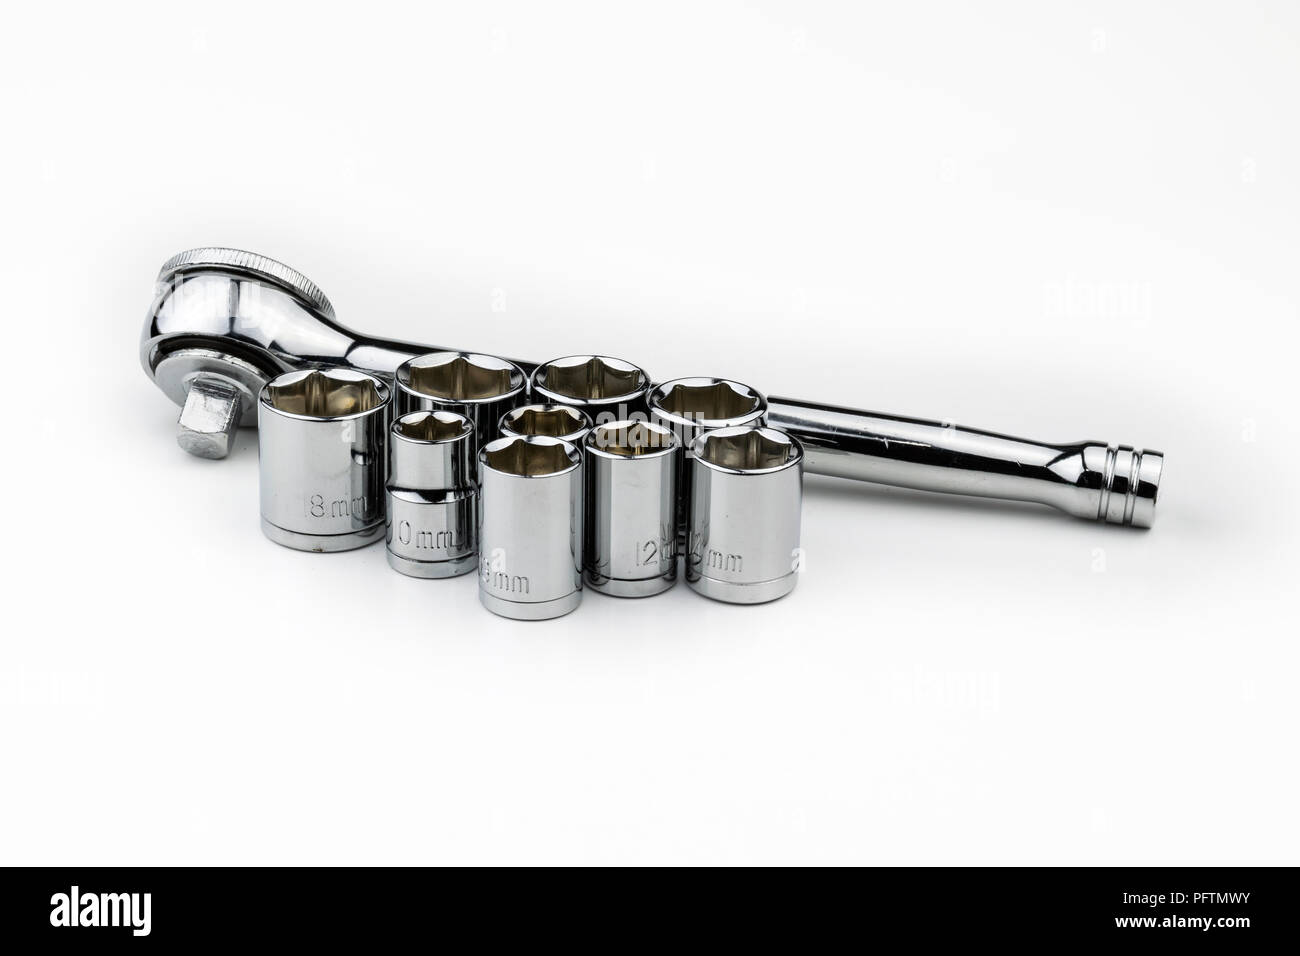 A shiny, silver, chrome socket wrench set with metric sockets in various sizes in millimeters on a white background like an automobile mechanic, repai Stock Photo